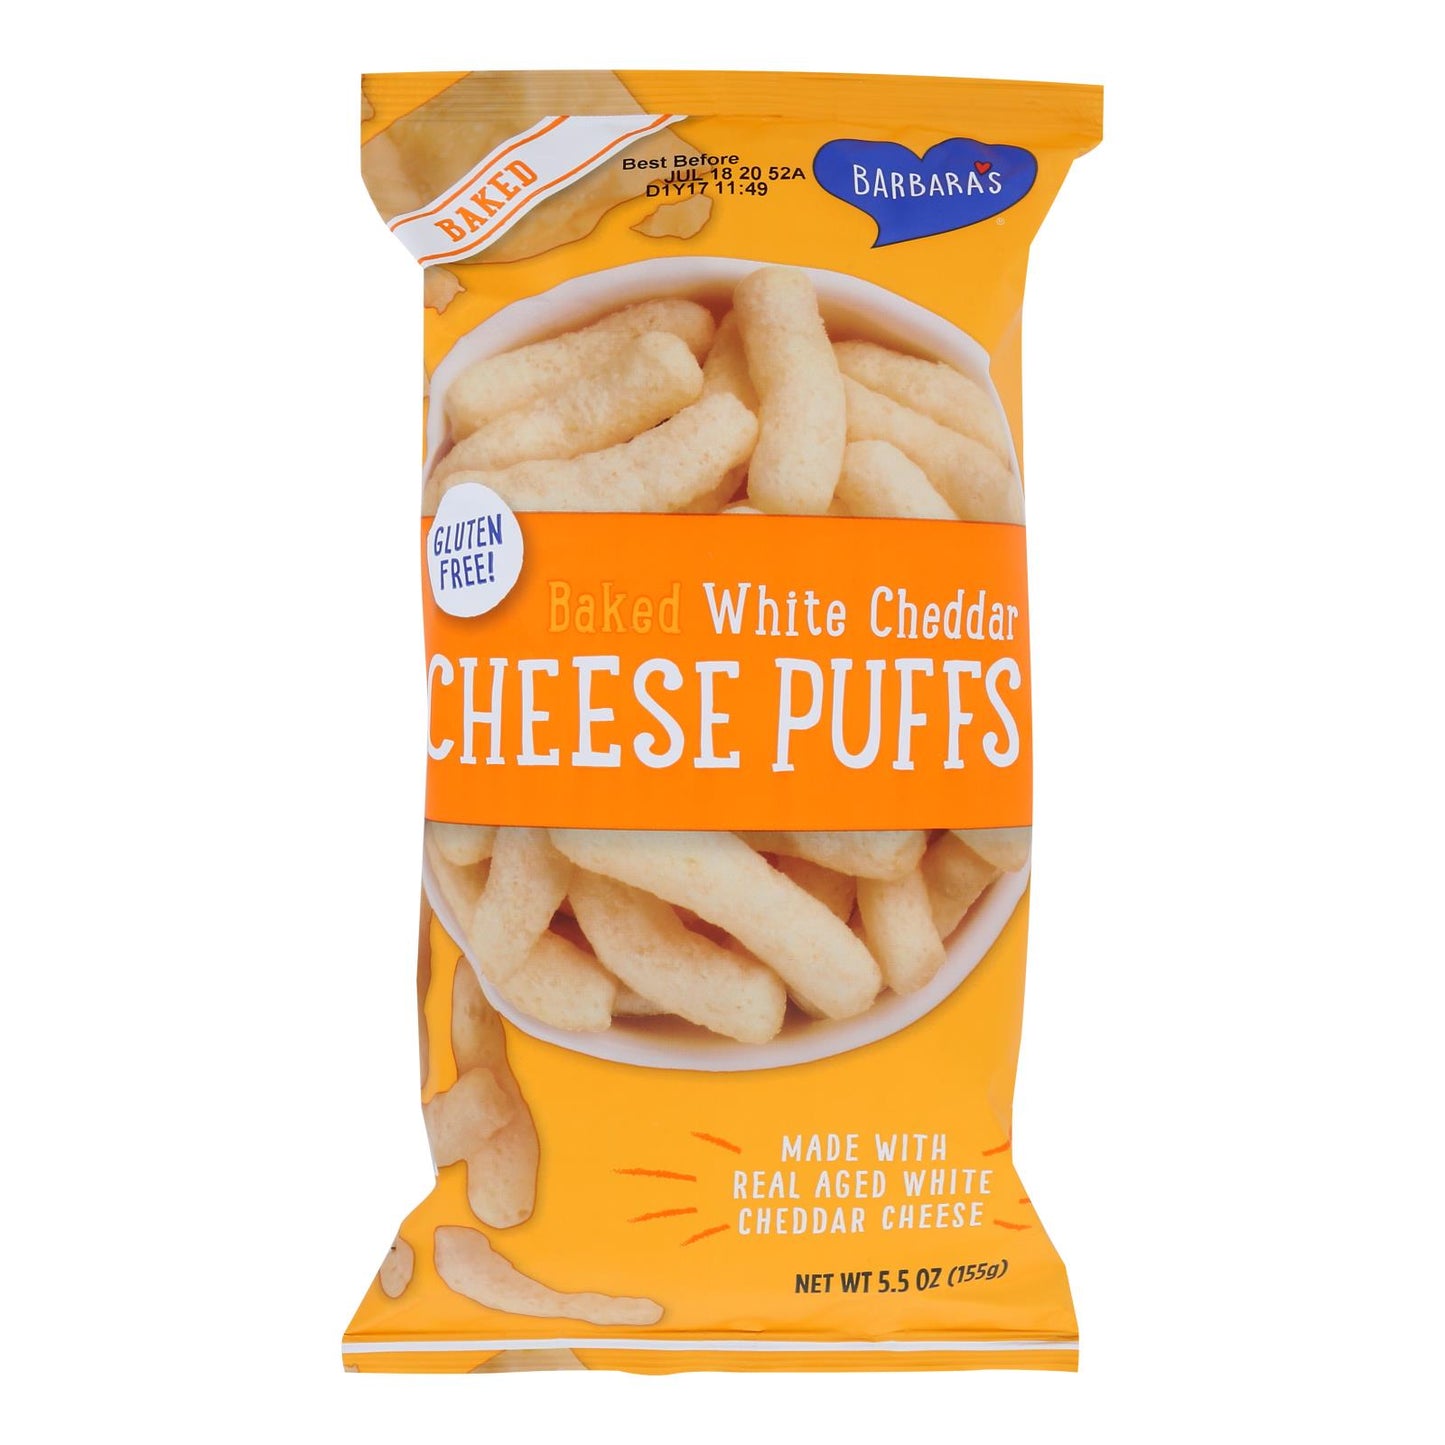 Barbara's Bakery - Baked White Cheddar Cheese Puffs - Case Of 12 - 5.5 Oz. | OnlyNaturals.us